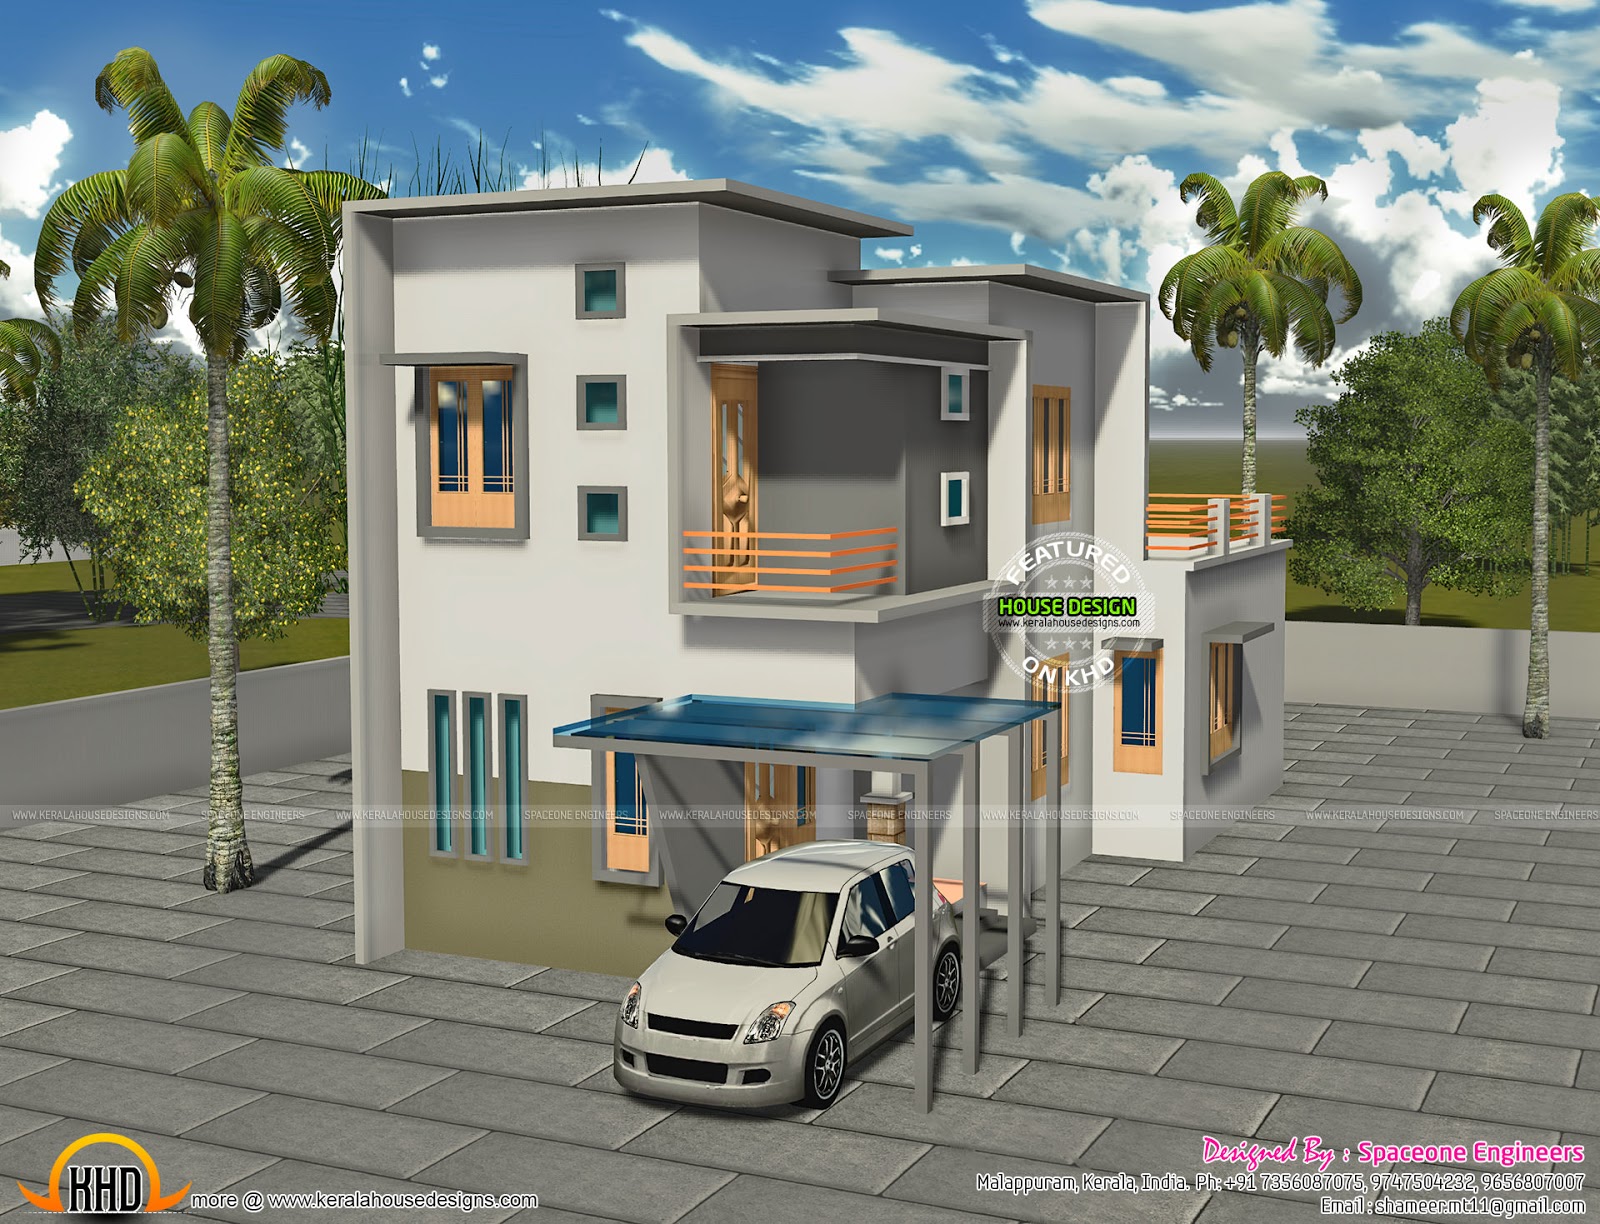  3  BHK  double storied house  in 1200  sq  ft  Kerala home  